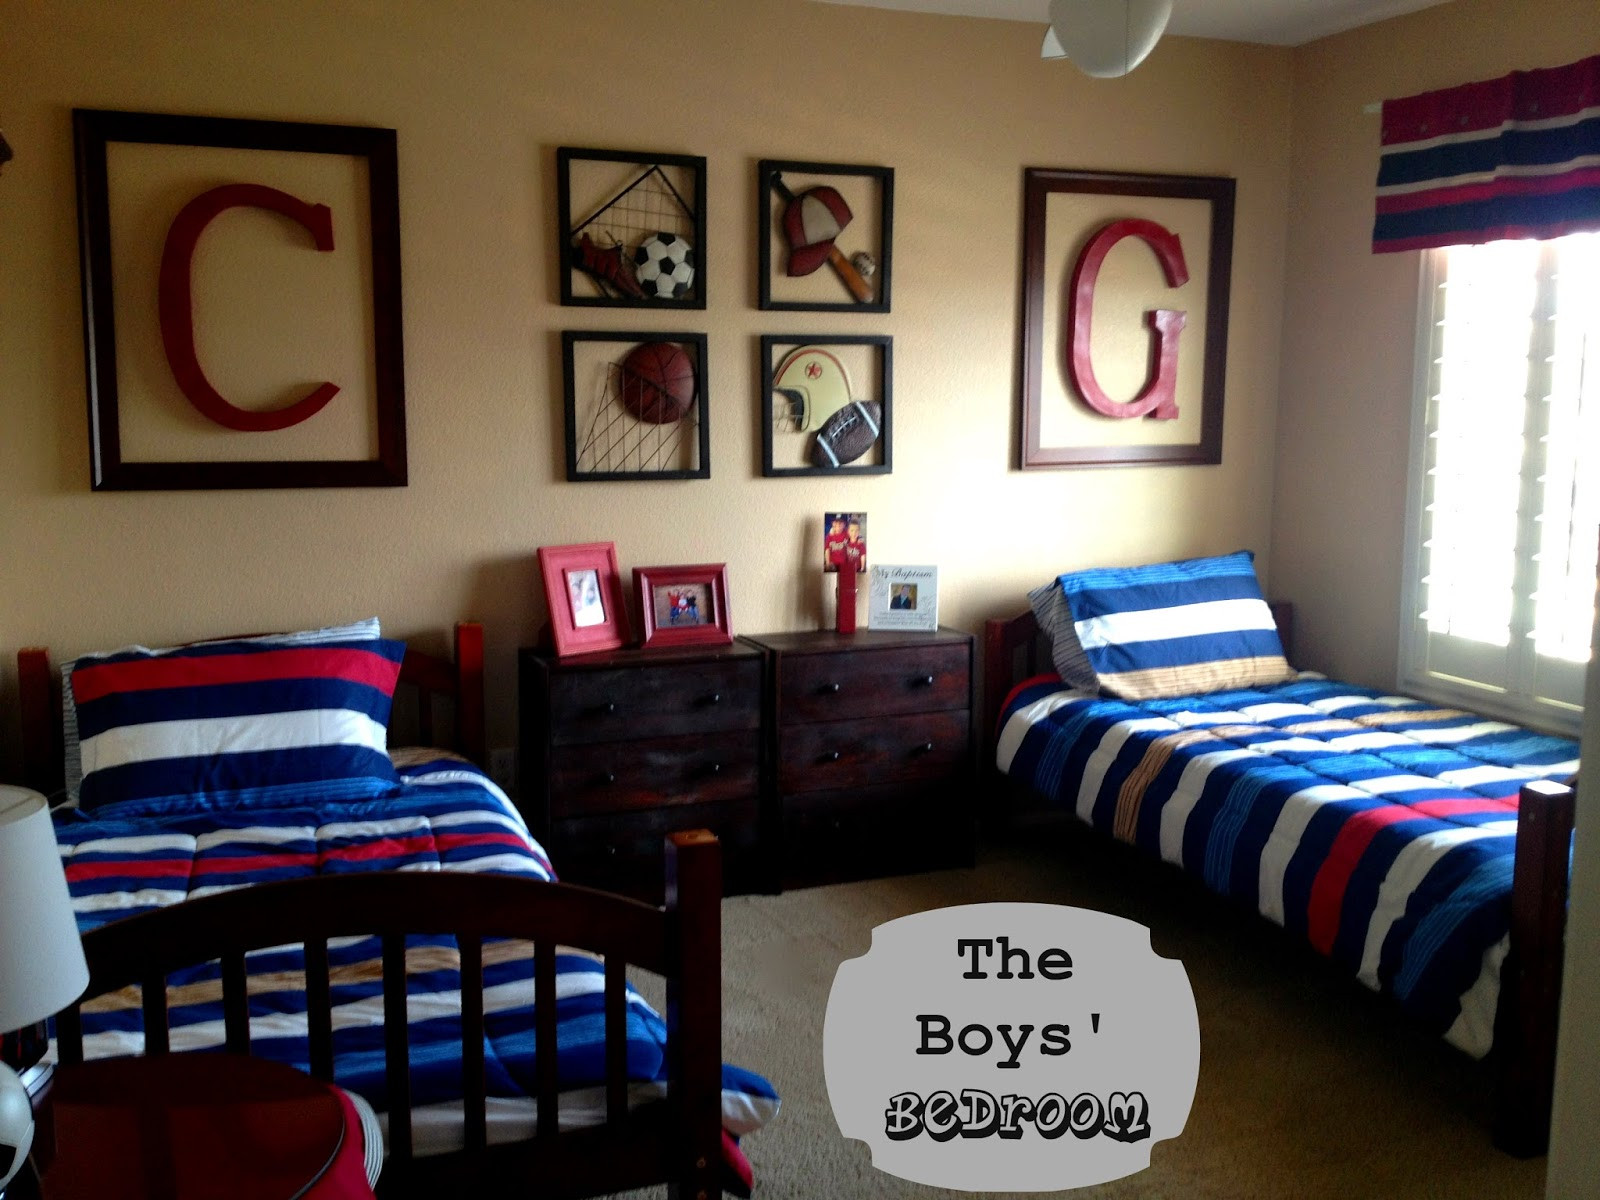 Kids Sports Room Decor
 Marci Coombs The Boys Sports Themed Bedroom